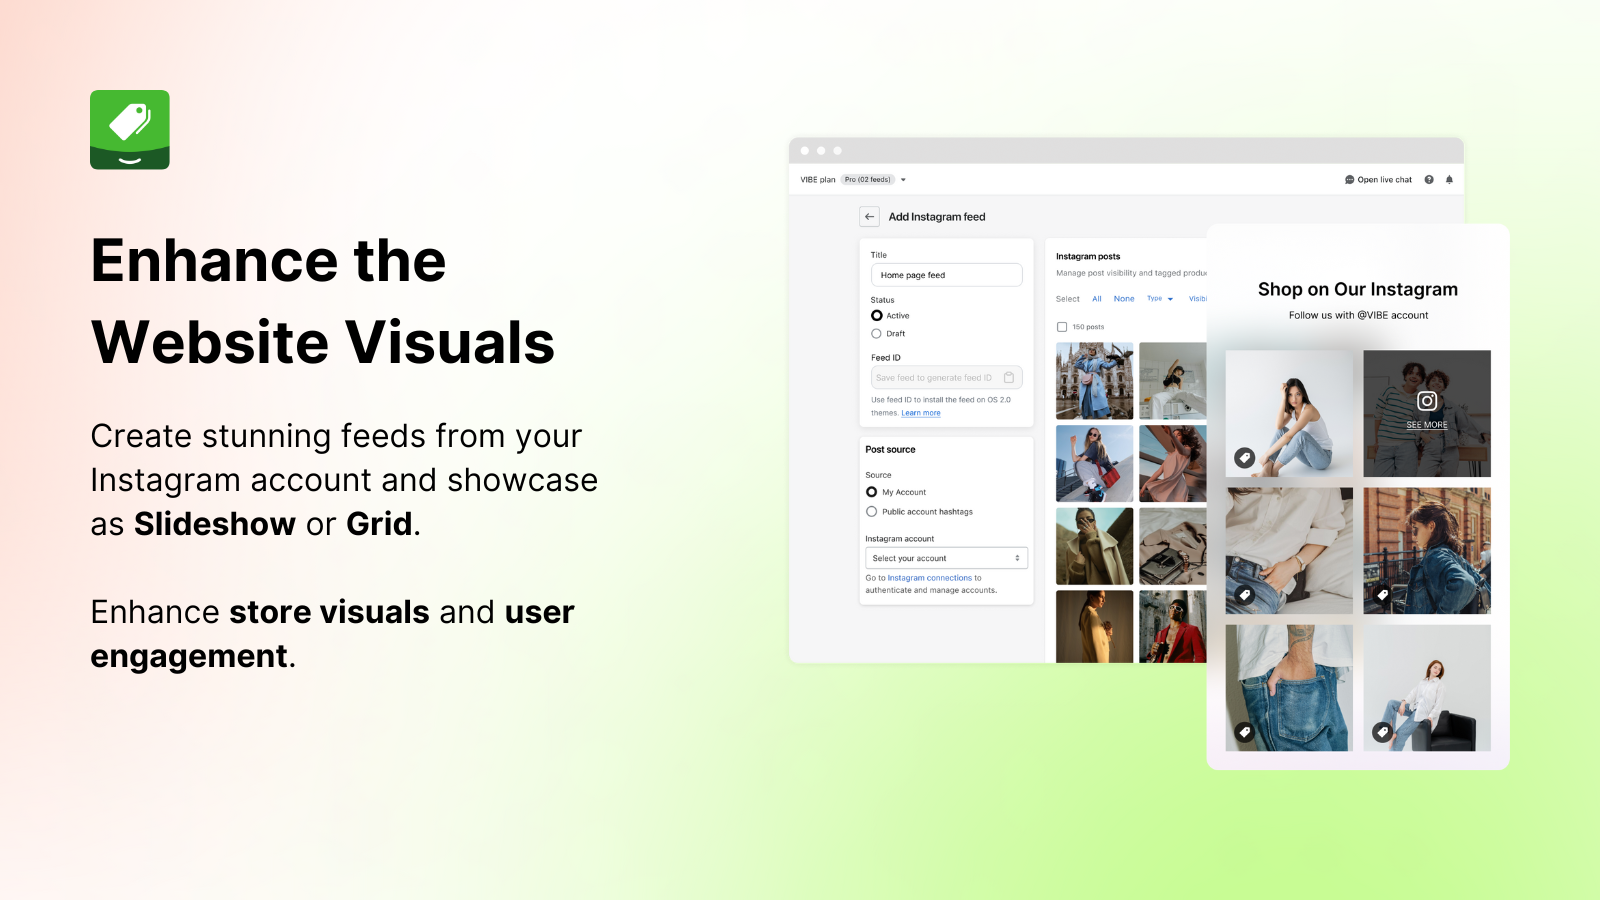 vibe instagram feed helps enhance the website visuals